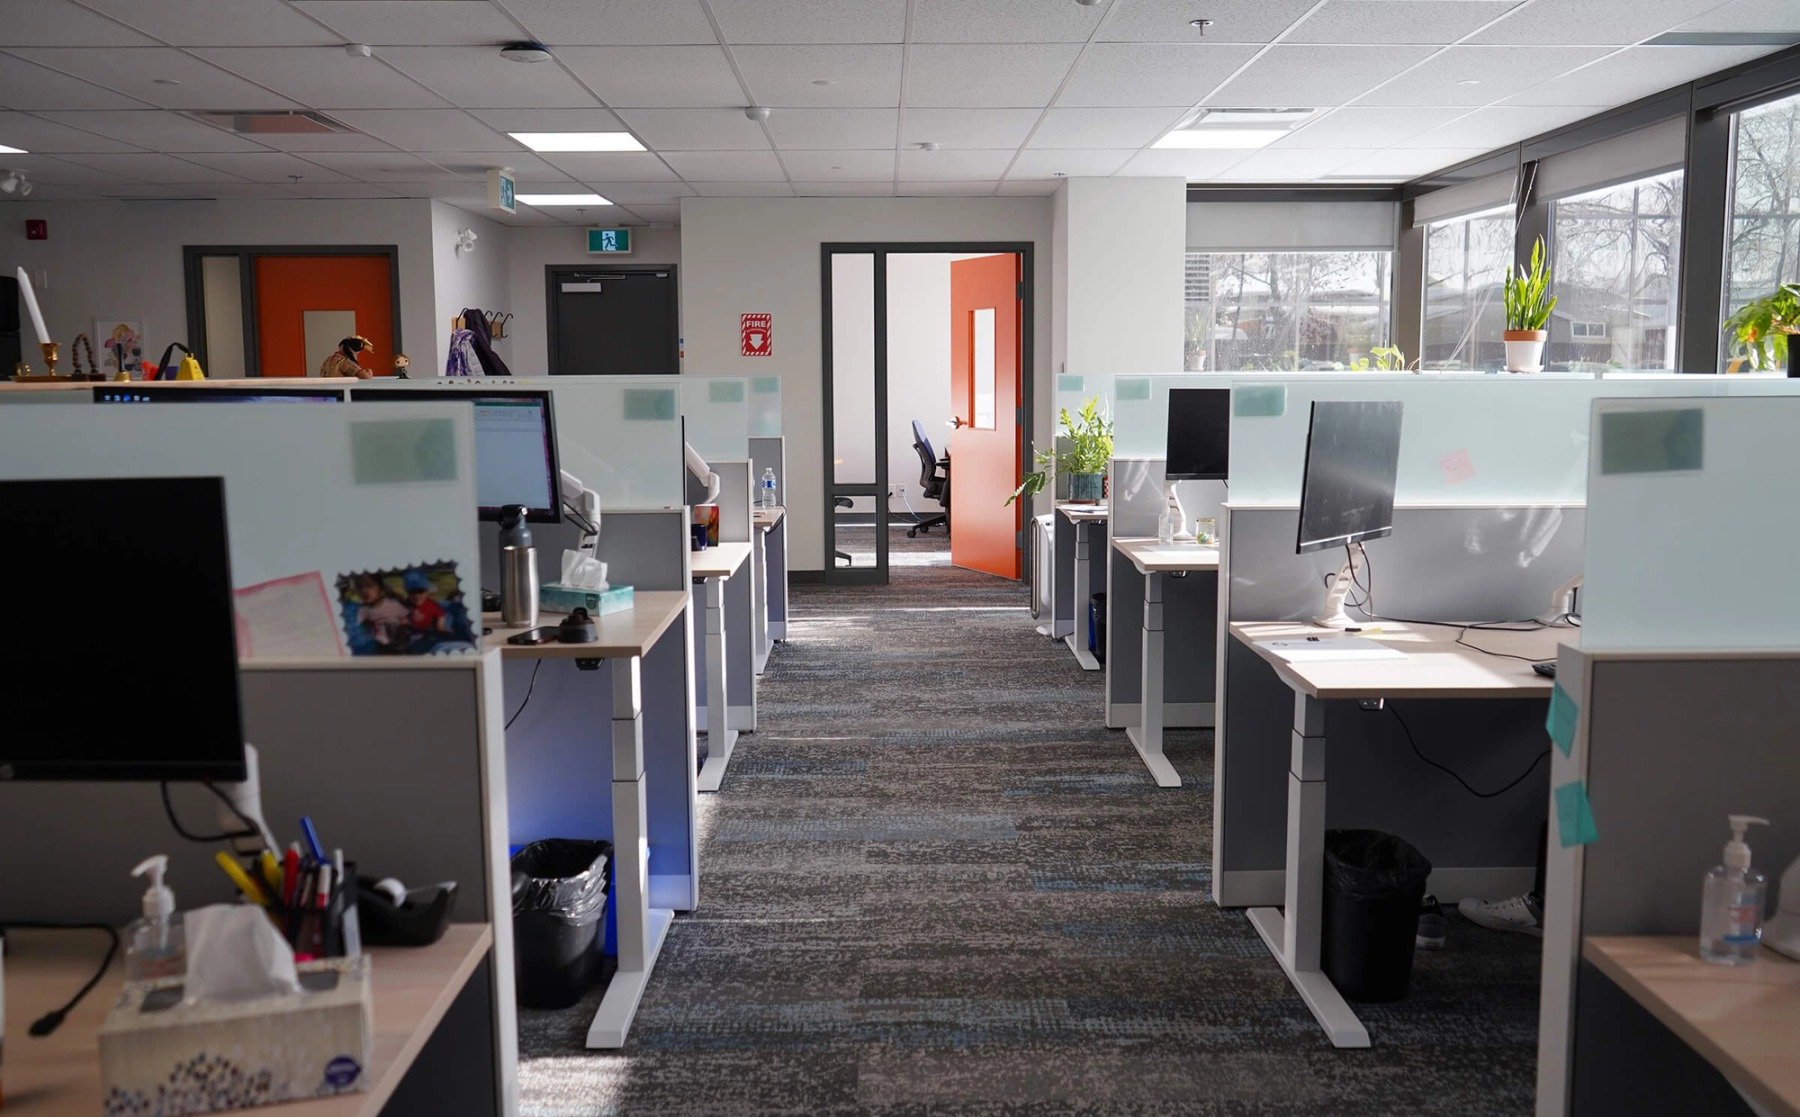 Rows of office desks on either side, with an open office door at the end of the corridor.